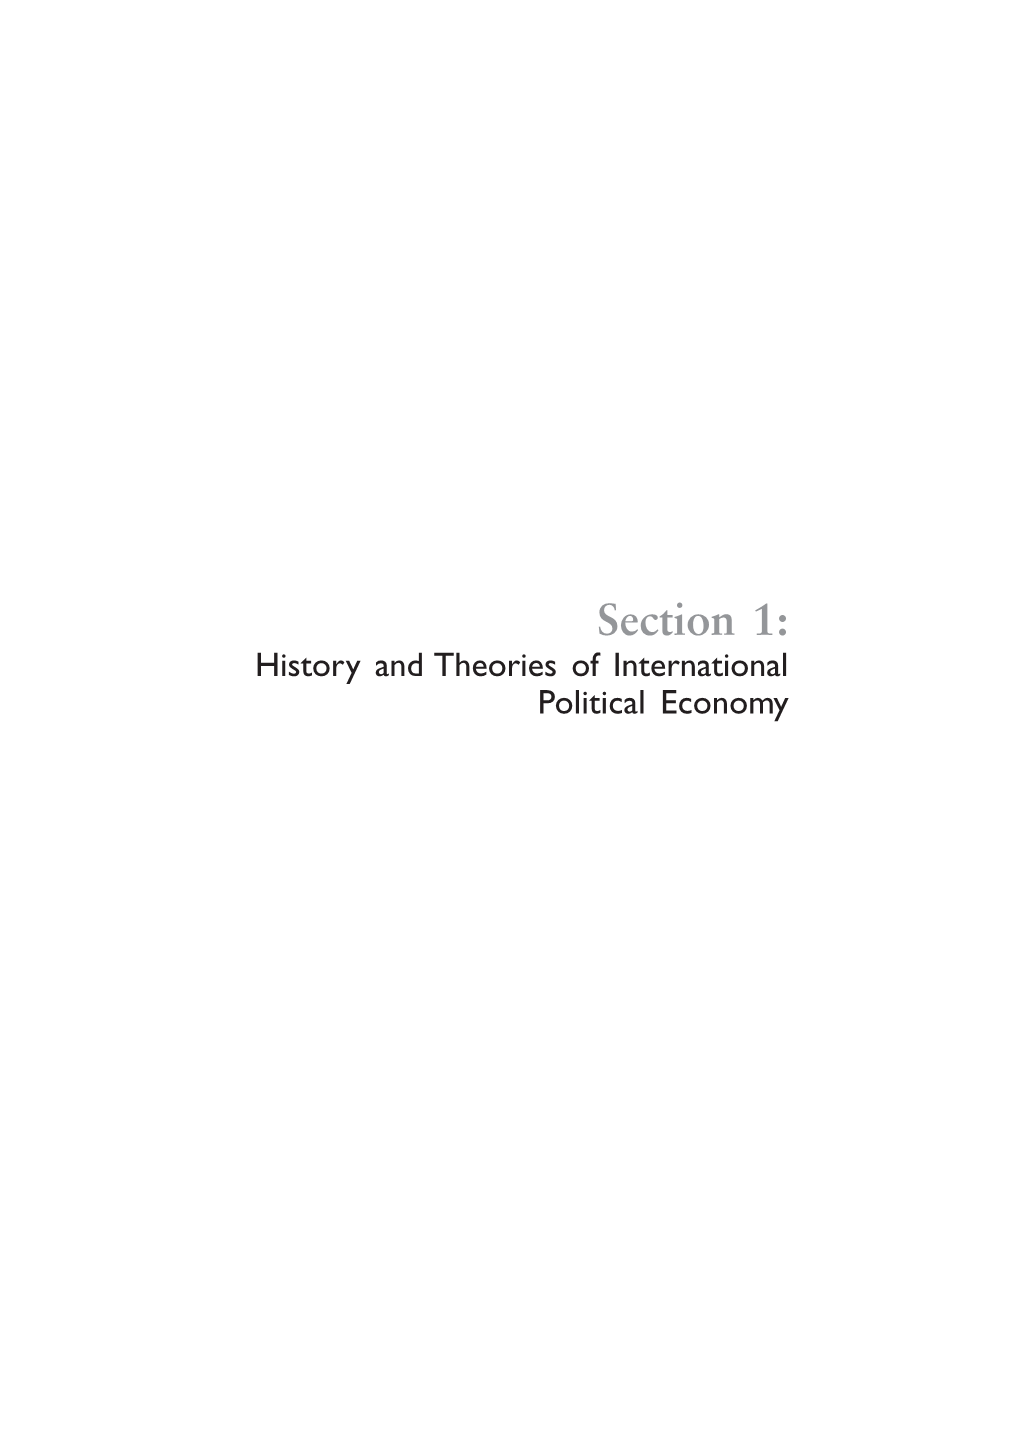 Section 1: History and Theories of International Political Economy 1